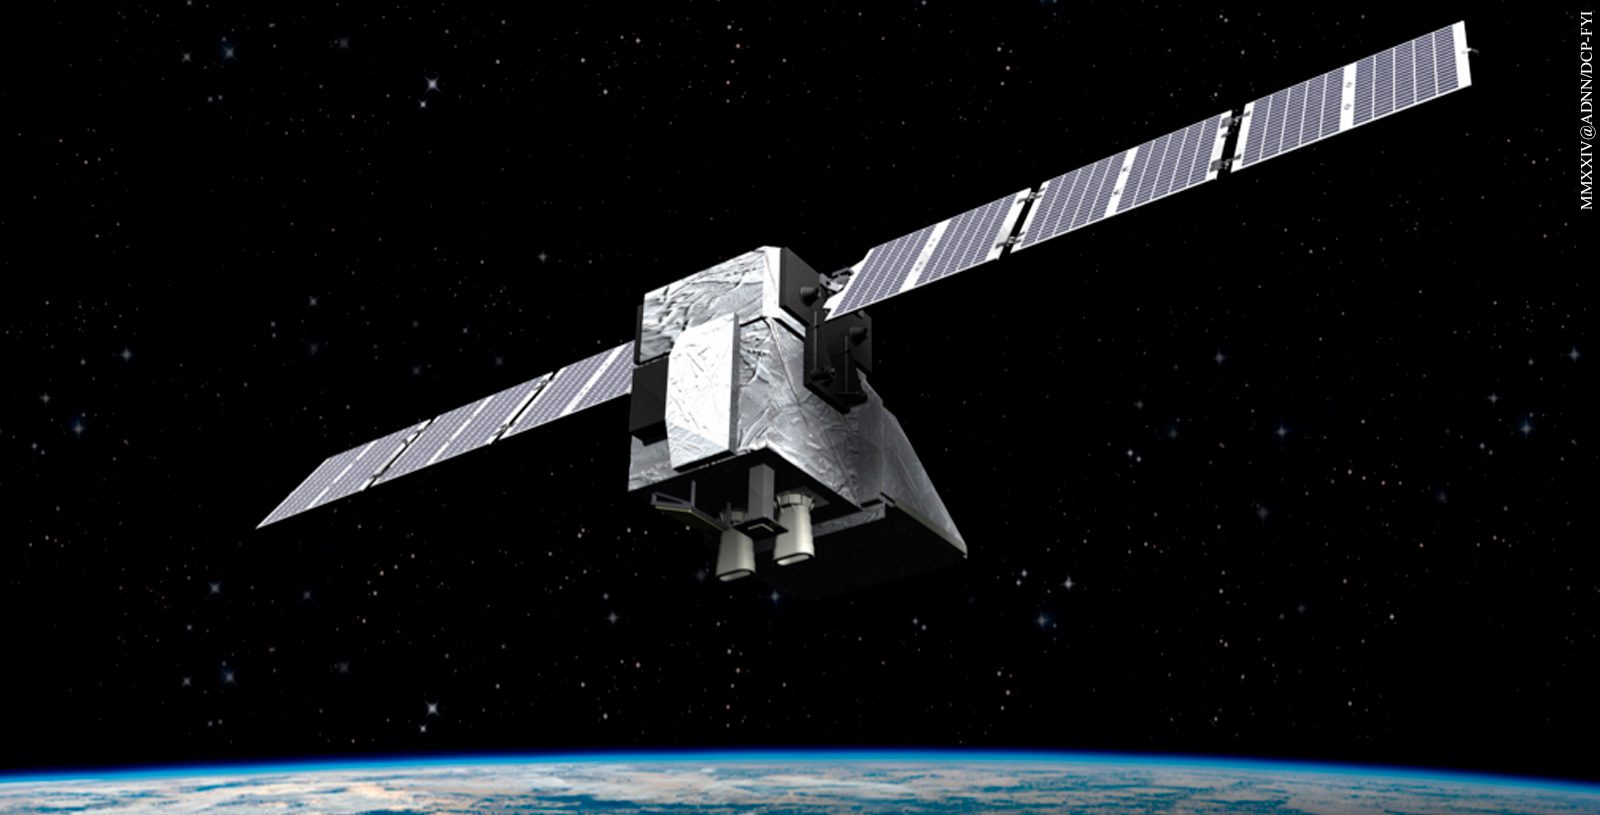 BAE Systems launches satellite to track global greenhouse gas emissions